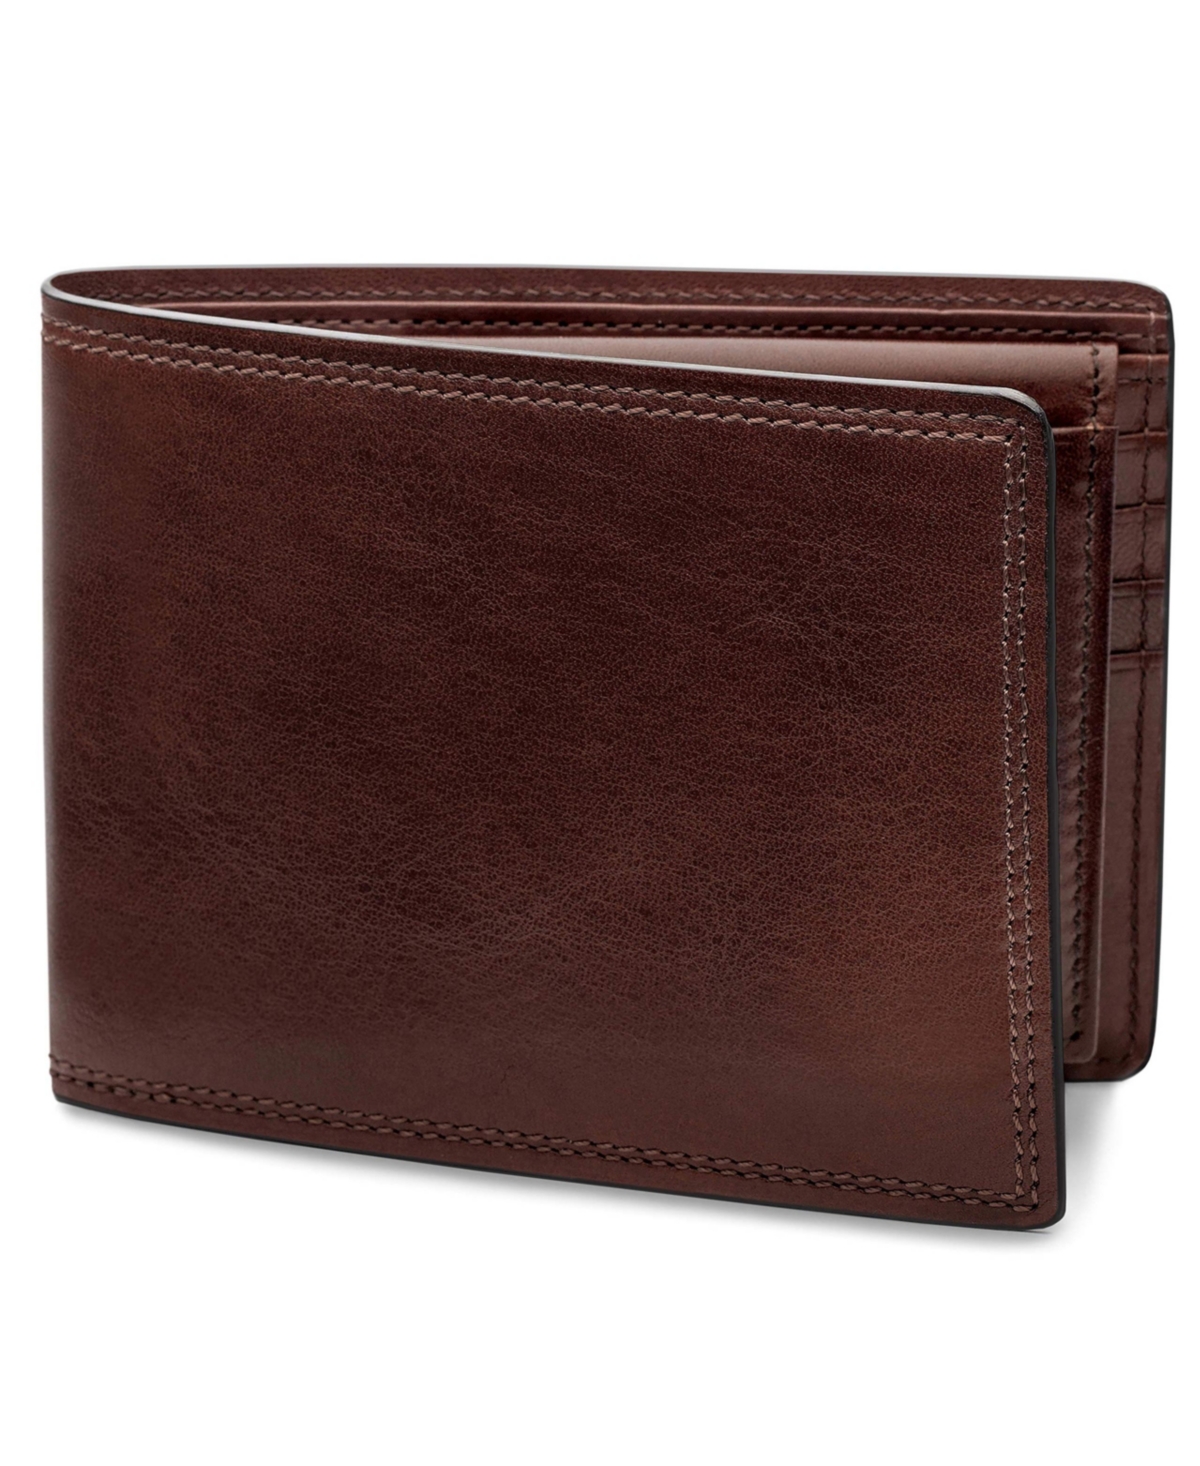 Men's Wallet, Dolce Leather Credit Wallet with I.d. Passcase - Dark brown